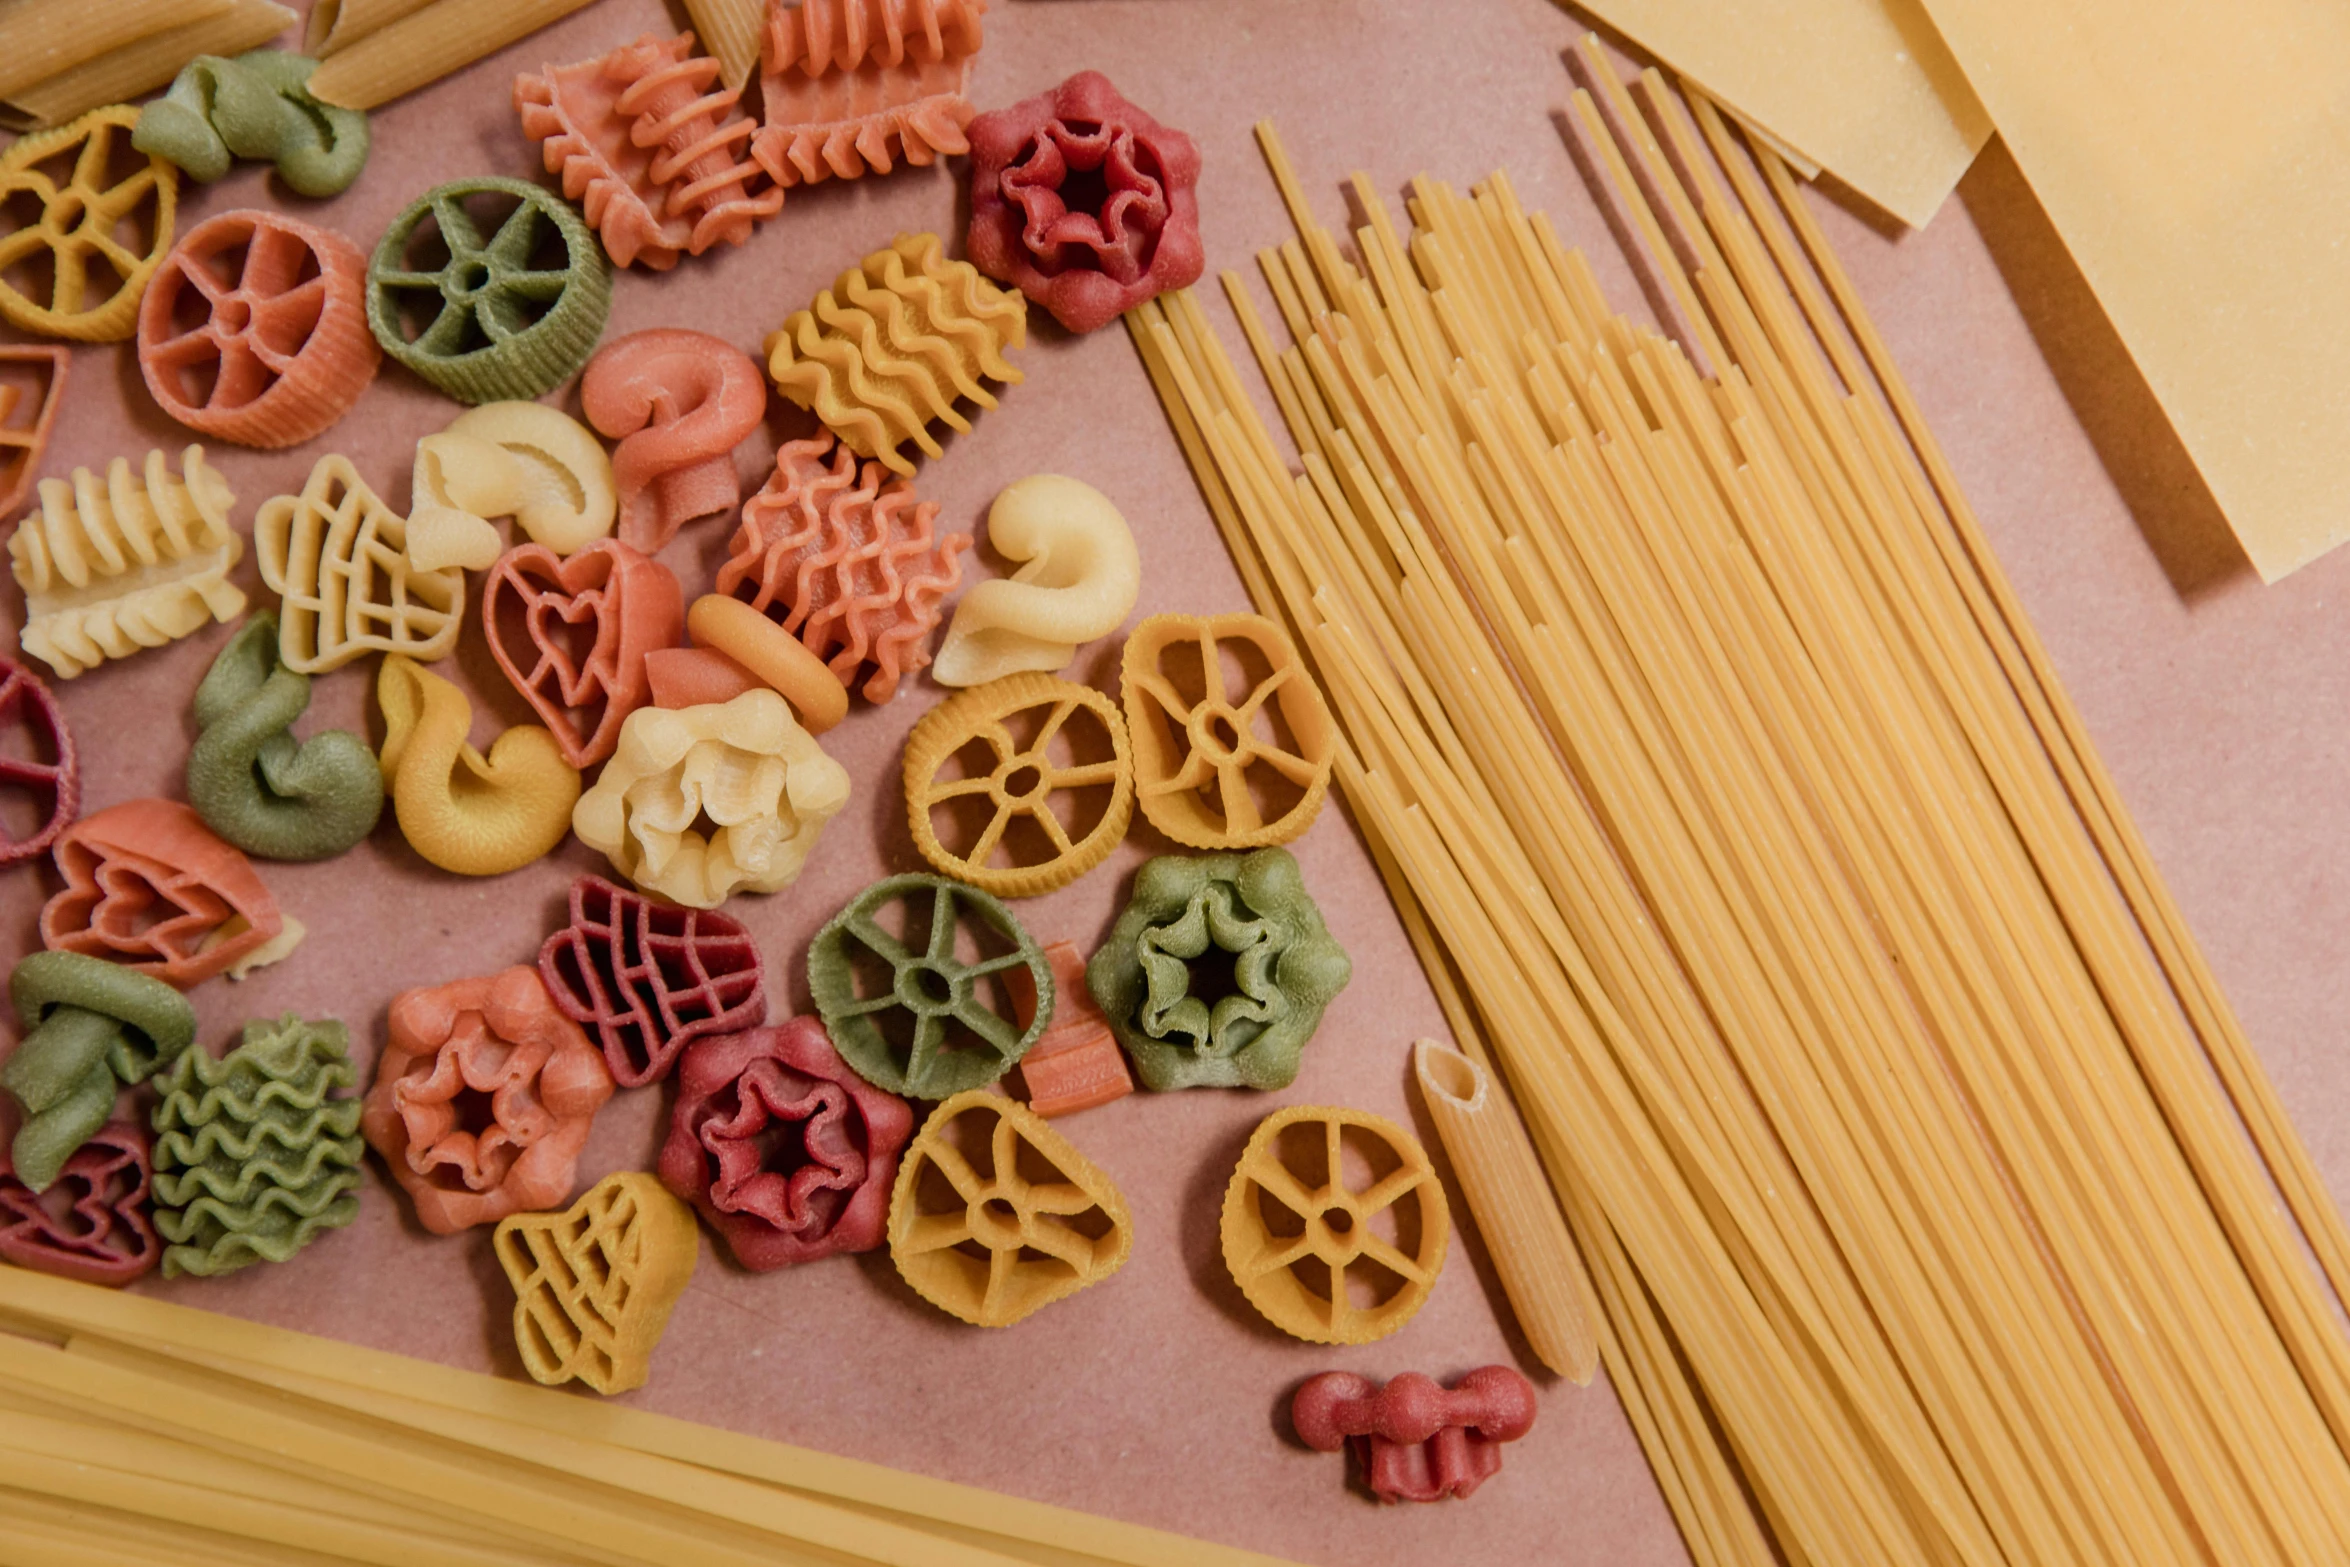 a few pastas with some colorful items next to them